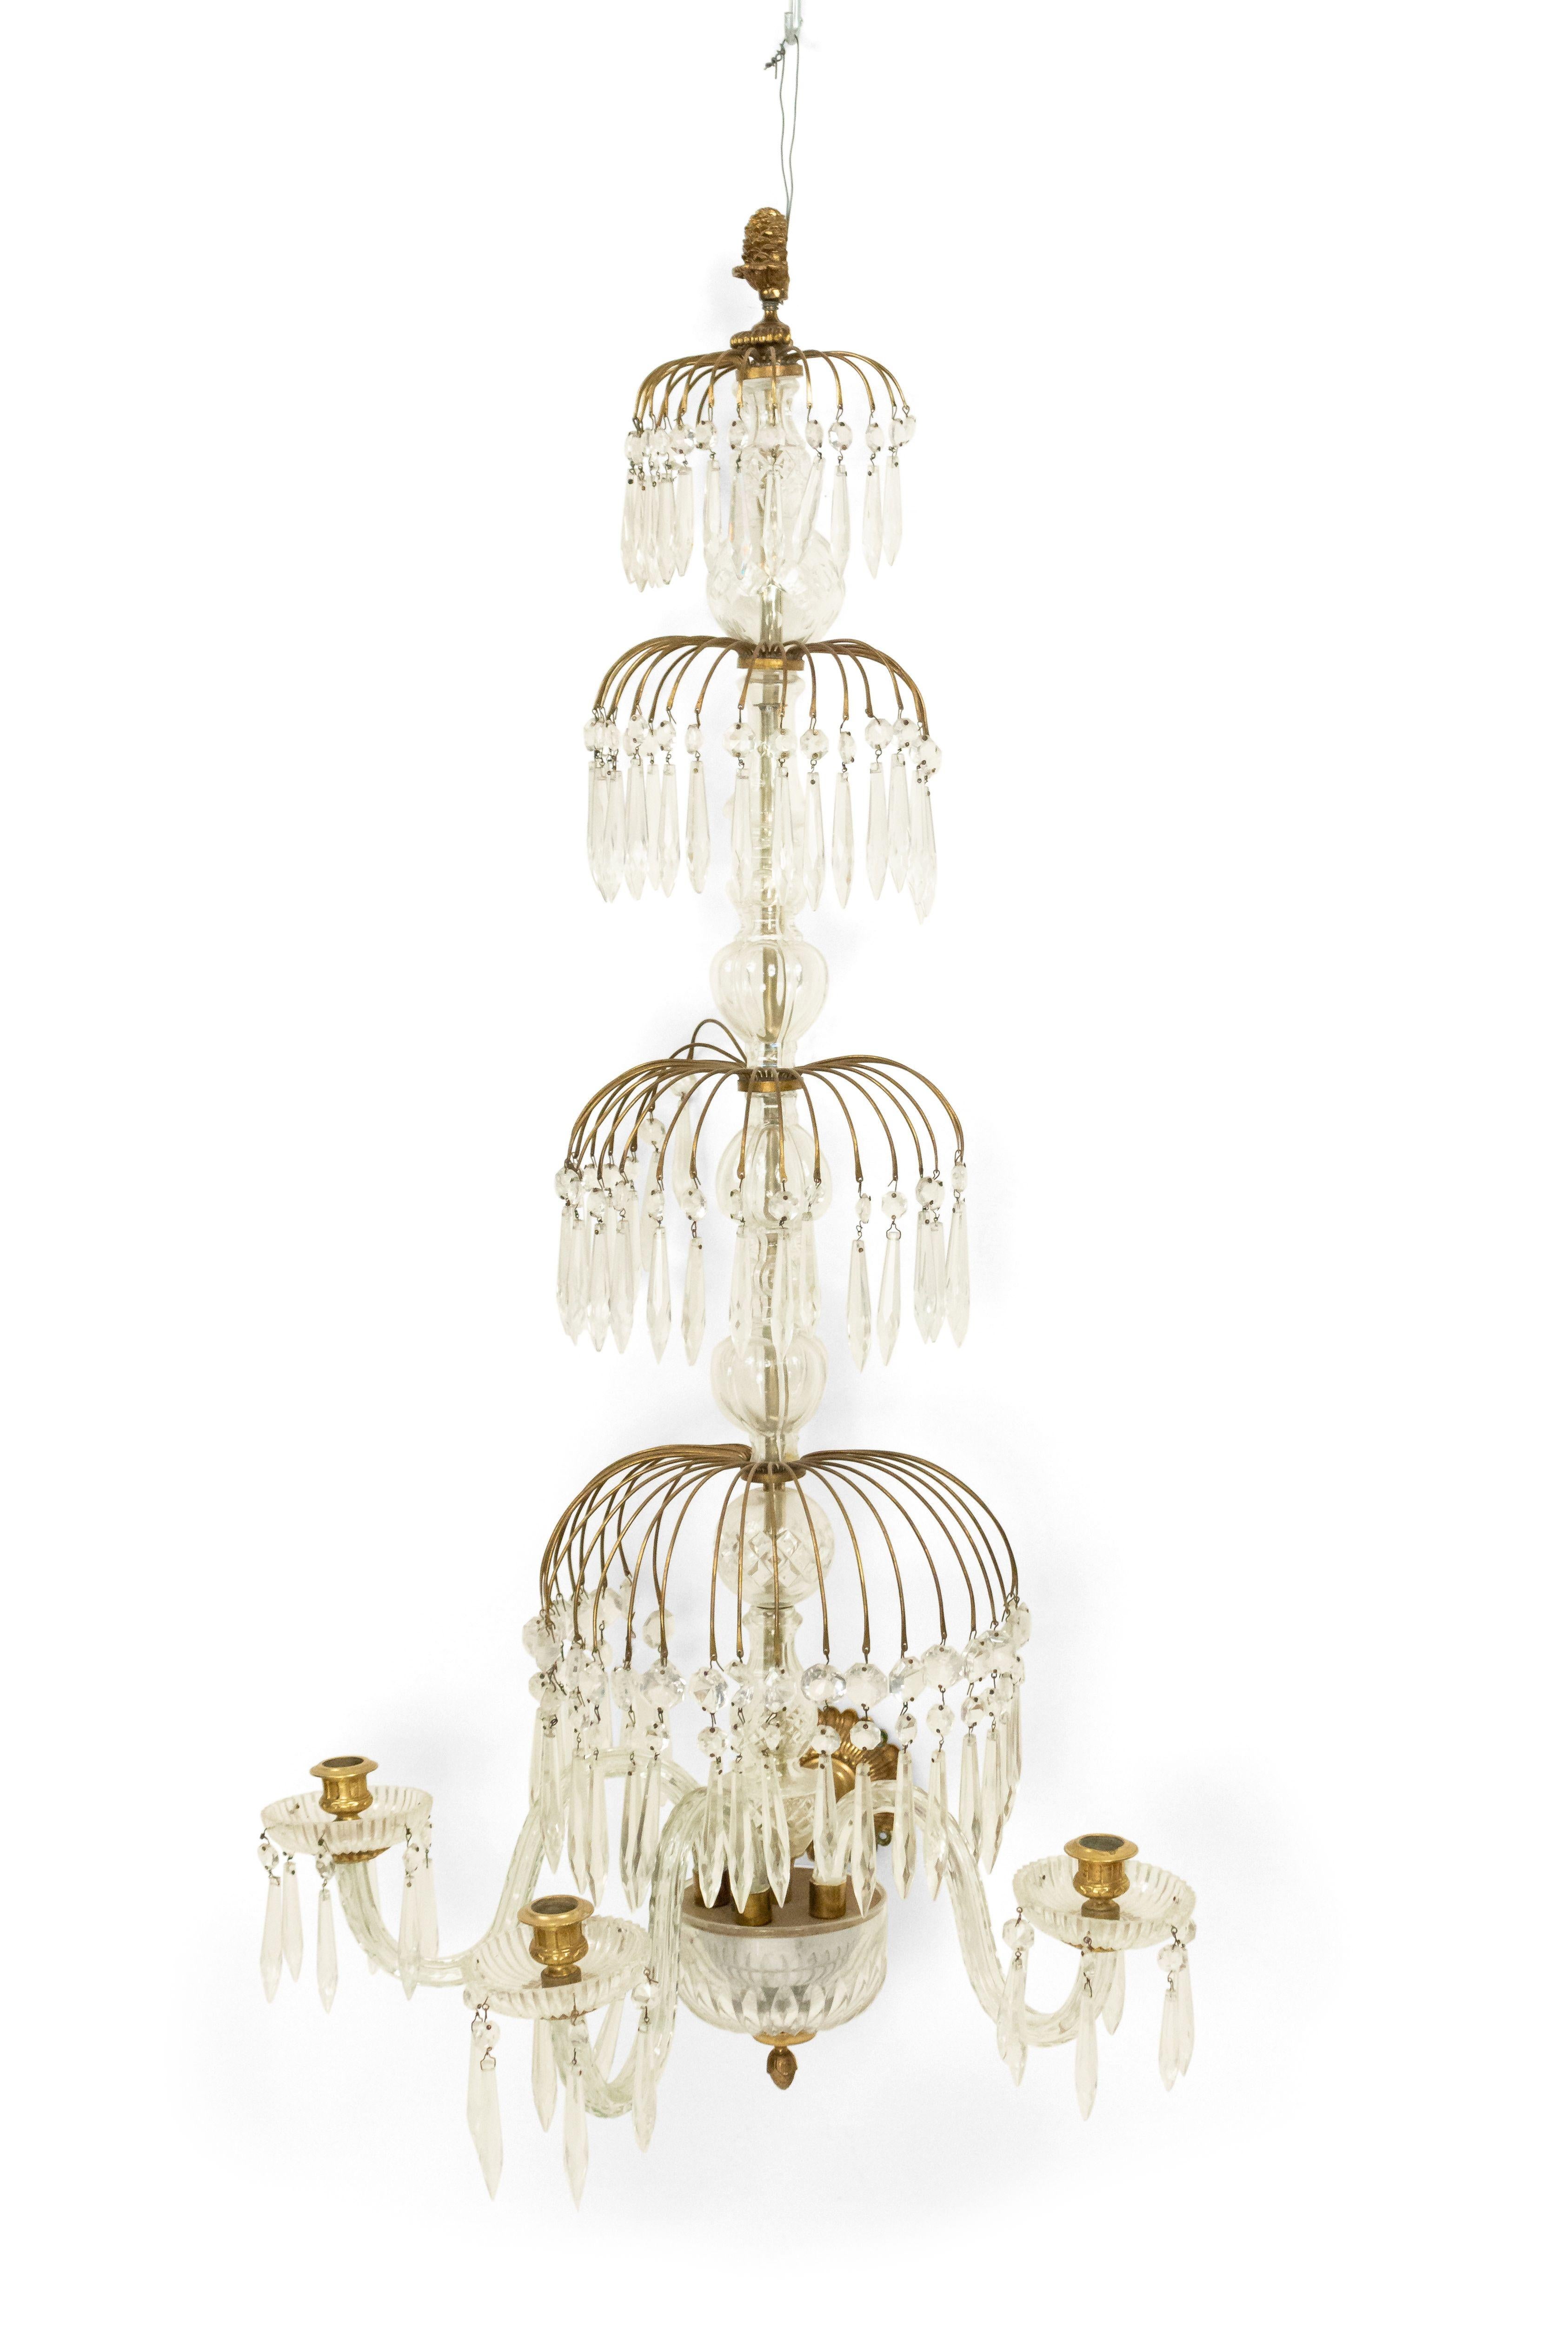 English Regency Style Monumental Crystal and Brass Tiered Wall Sconce For Sale 5